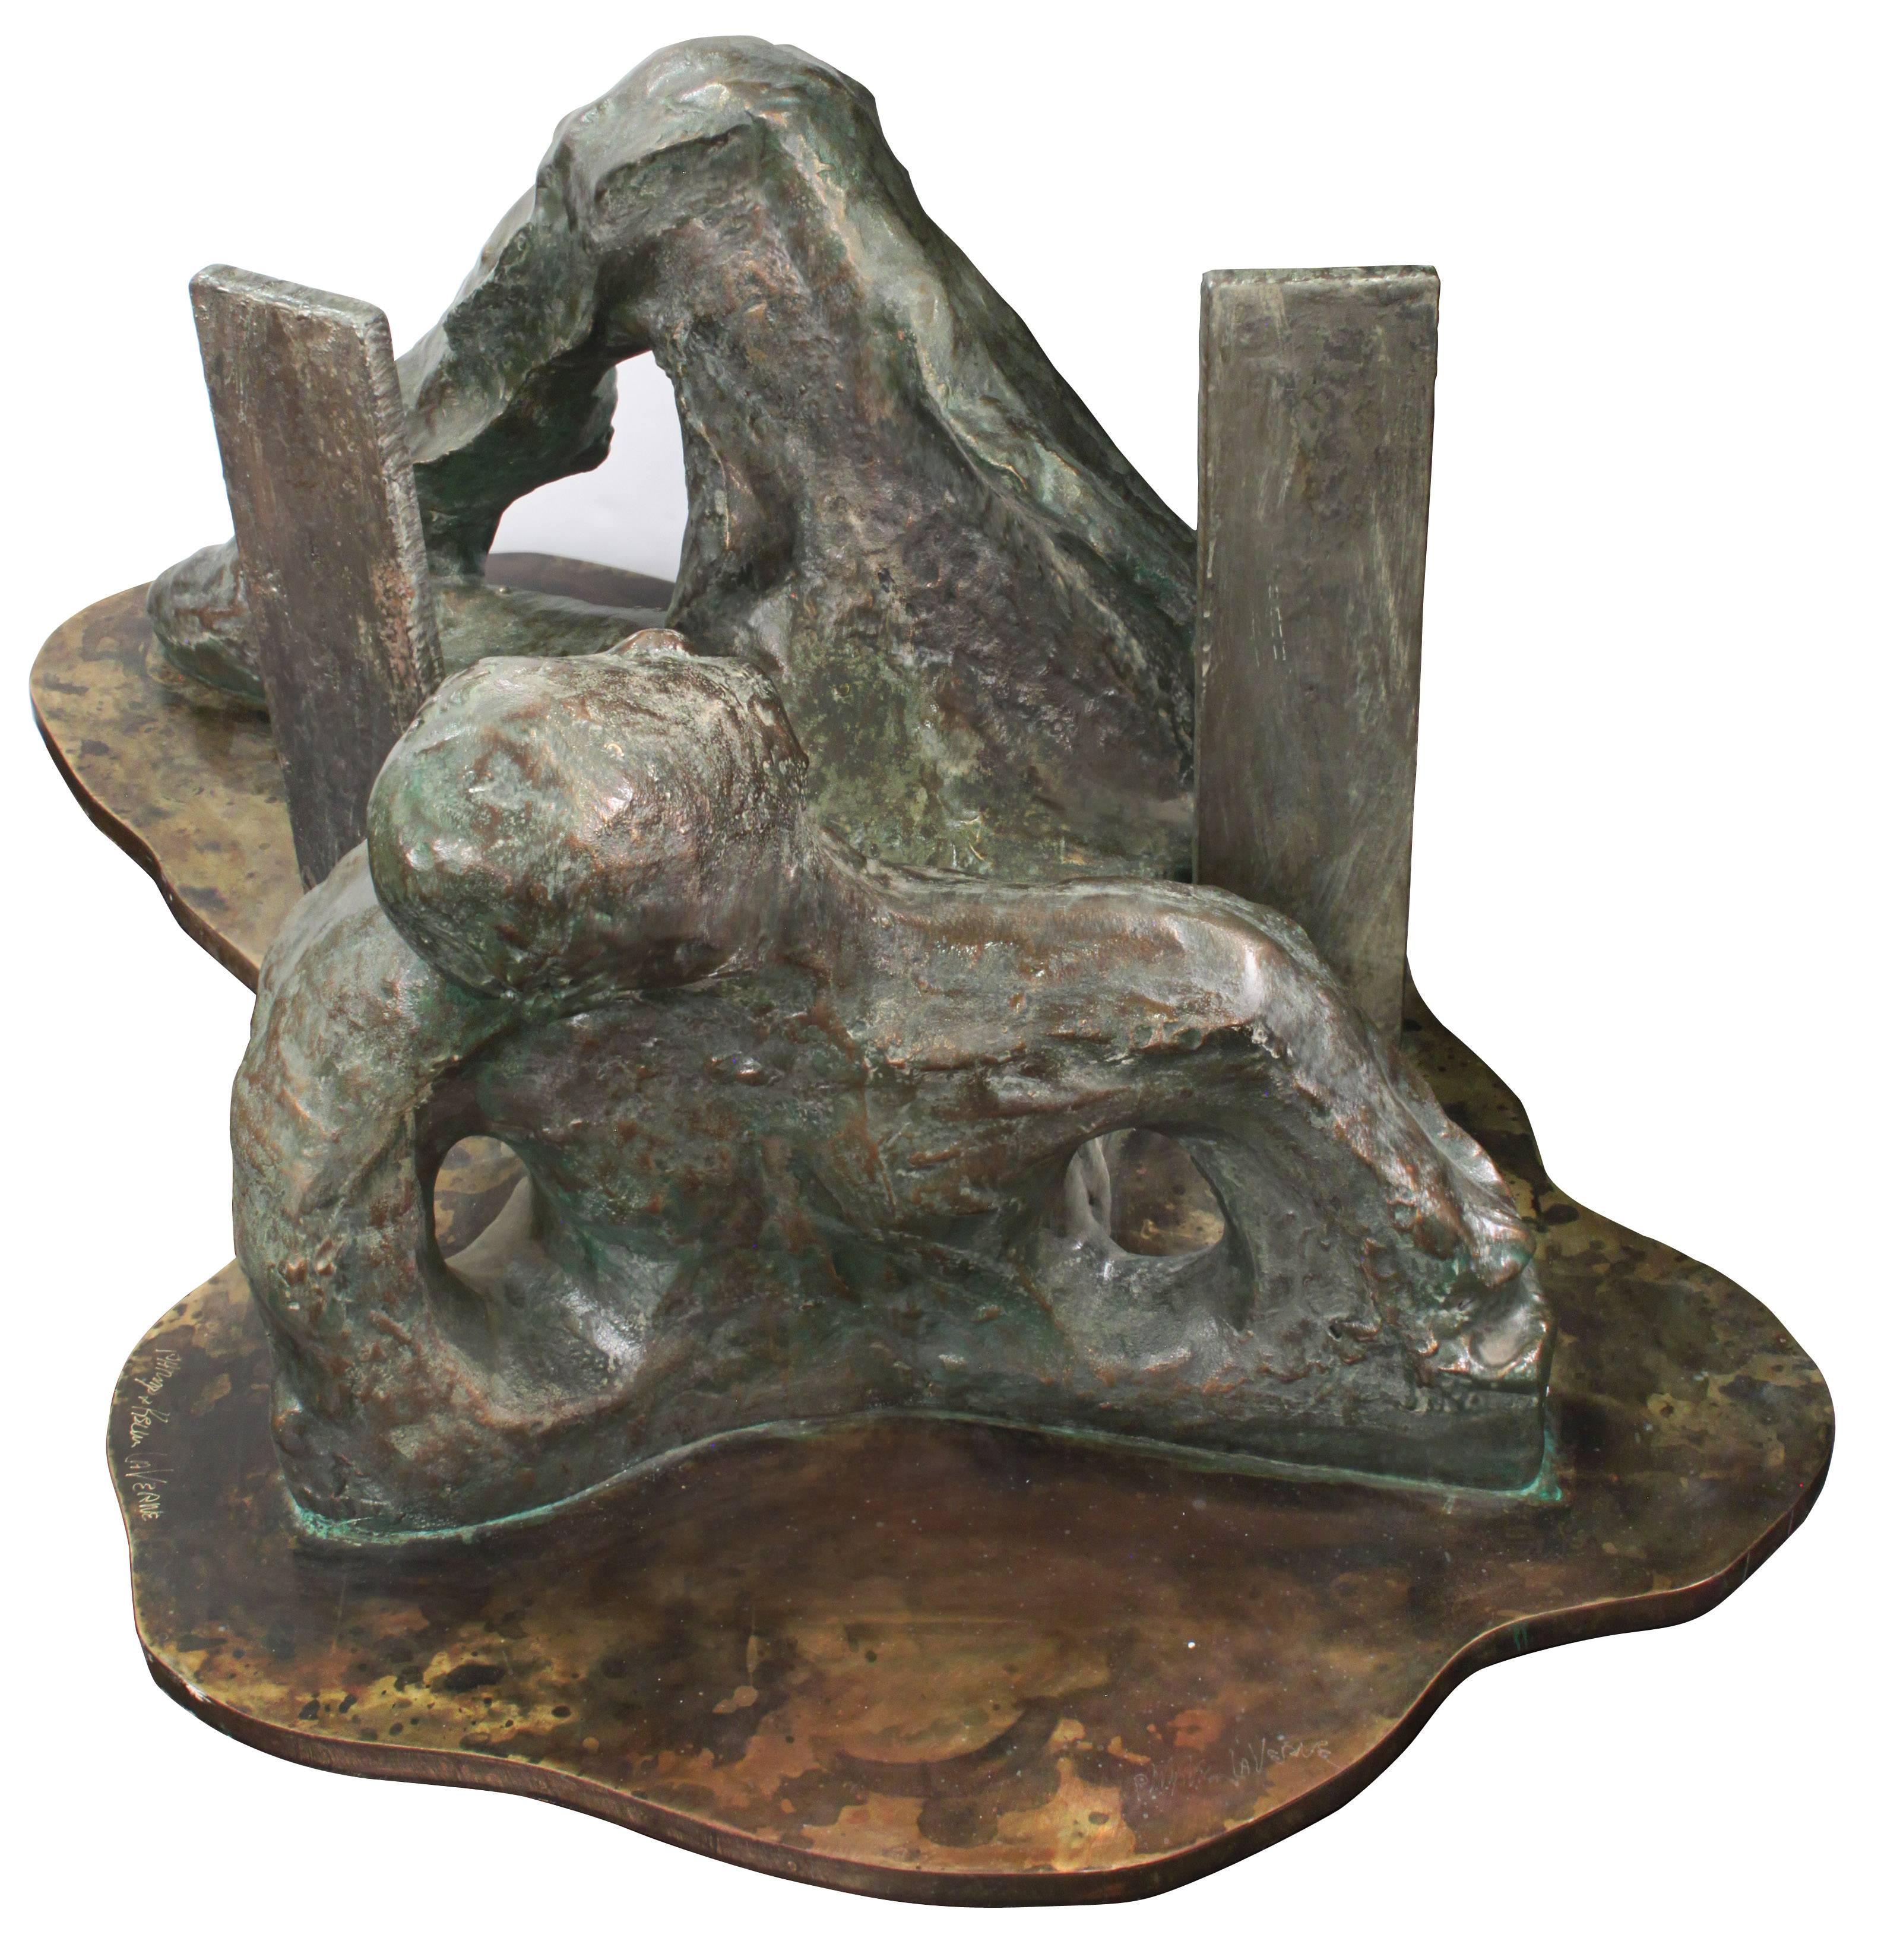 “Silence” an exceptional one-of-a-kind large coffee table of a reclining figure, cast solid bronze with a patinated bronze base, with a thick glass top by Philip and Kelvin Laverne, American, 1970s (signed “Philip and Kelvin Laverne”). This is a